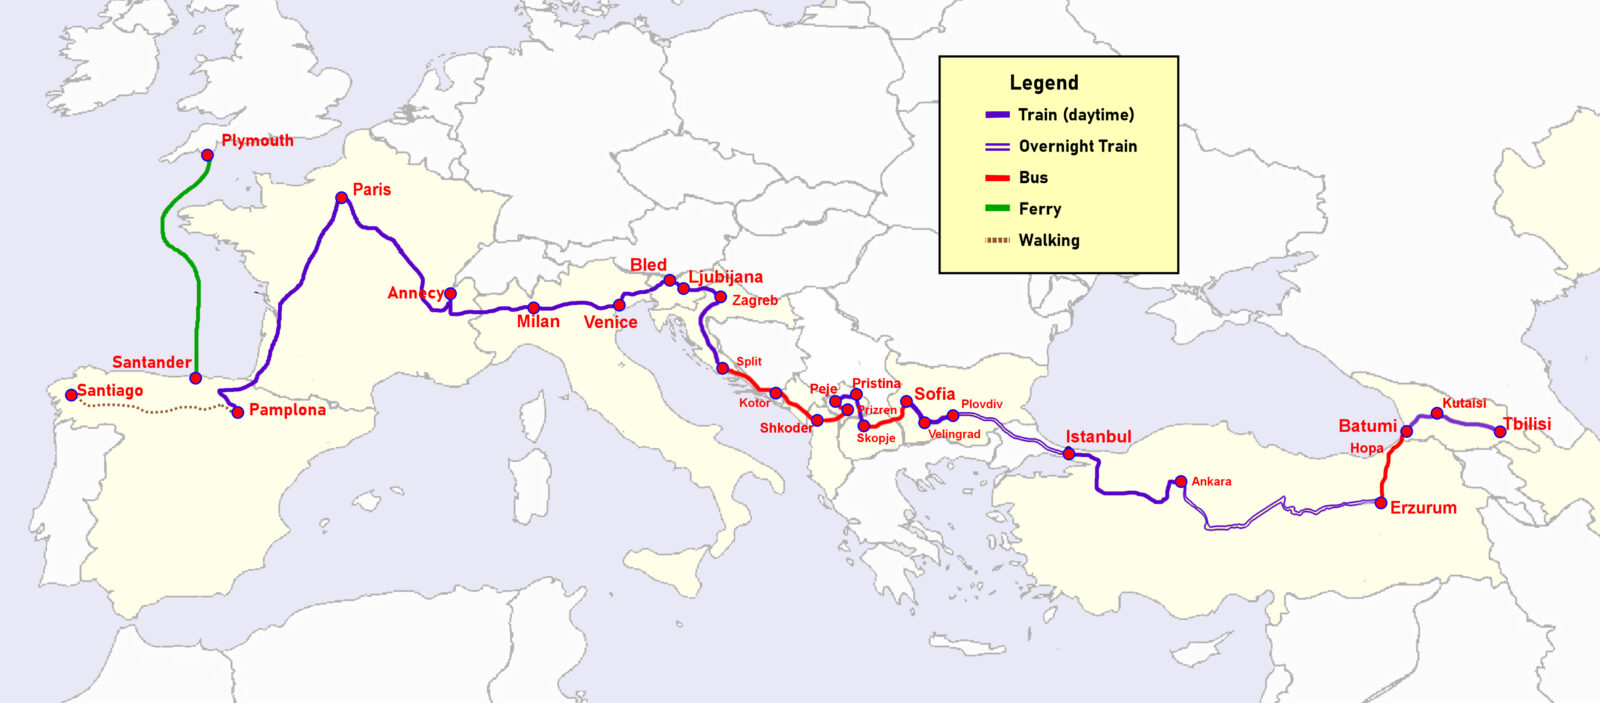 Map of the intended version of my journey from Georgia to Spain and beyond.